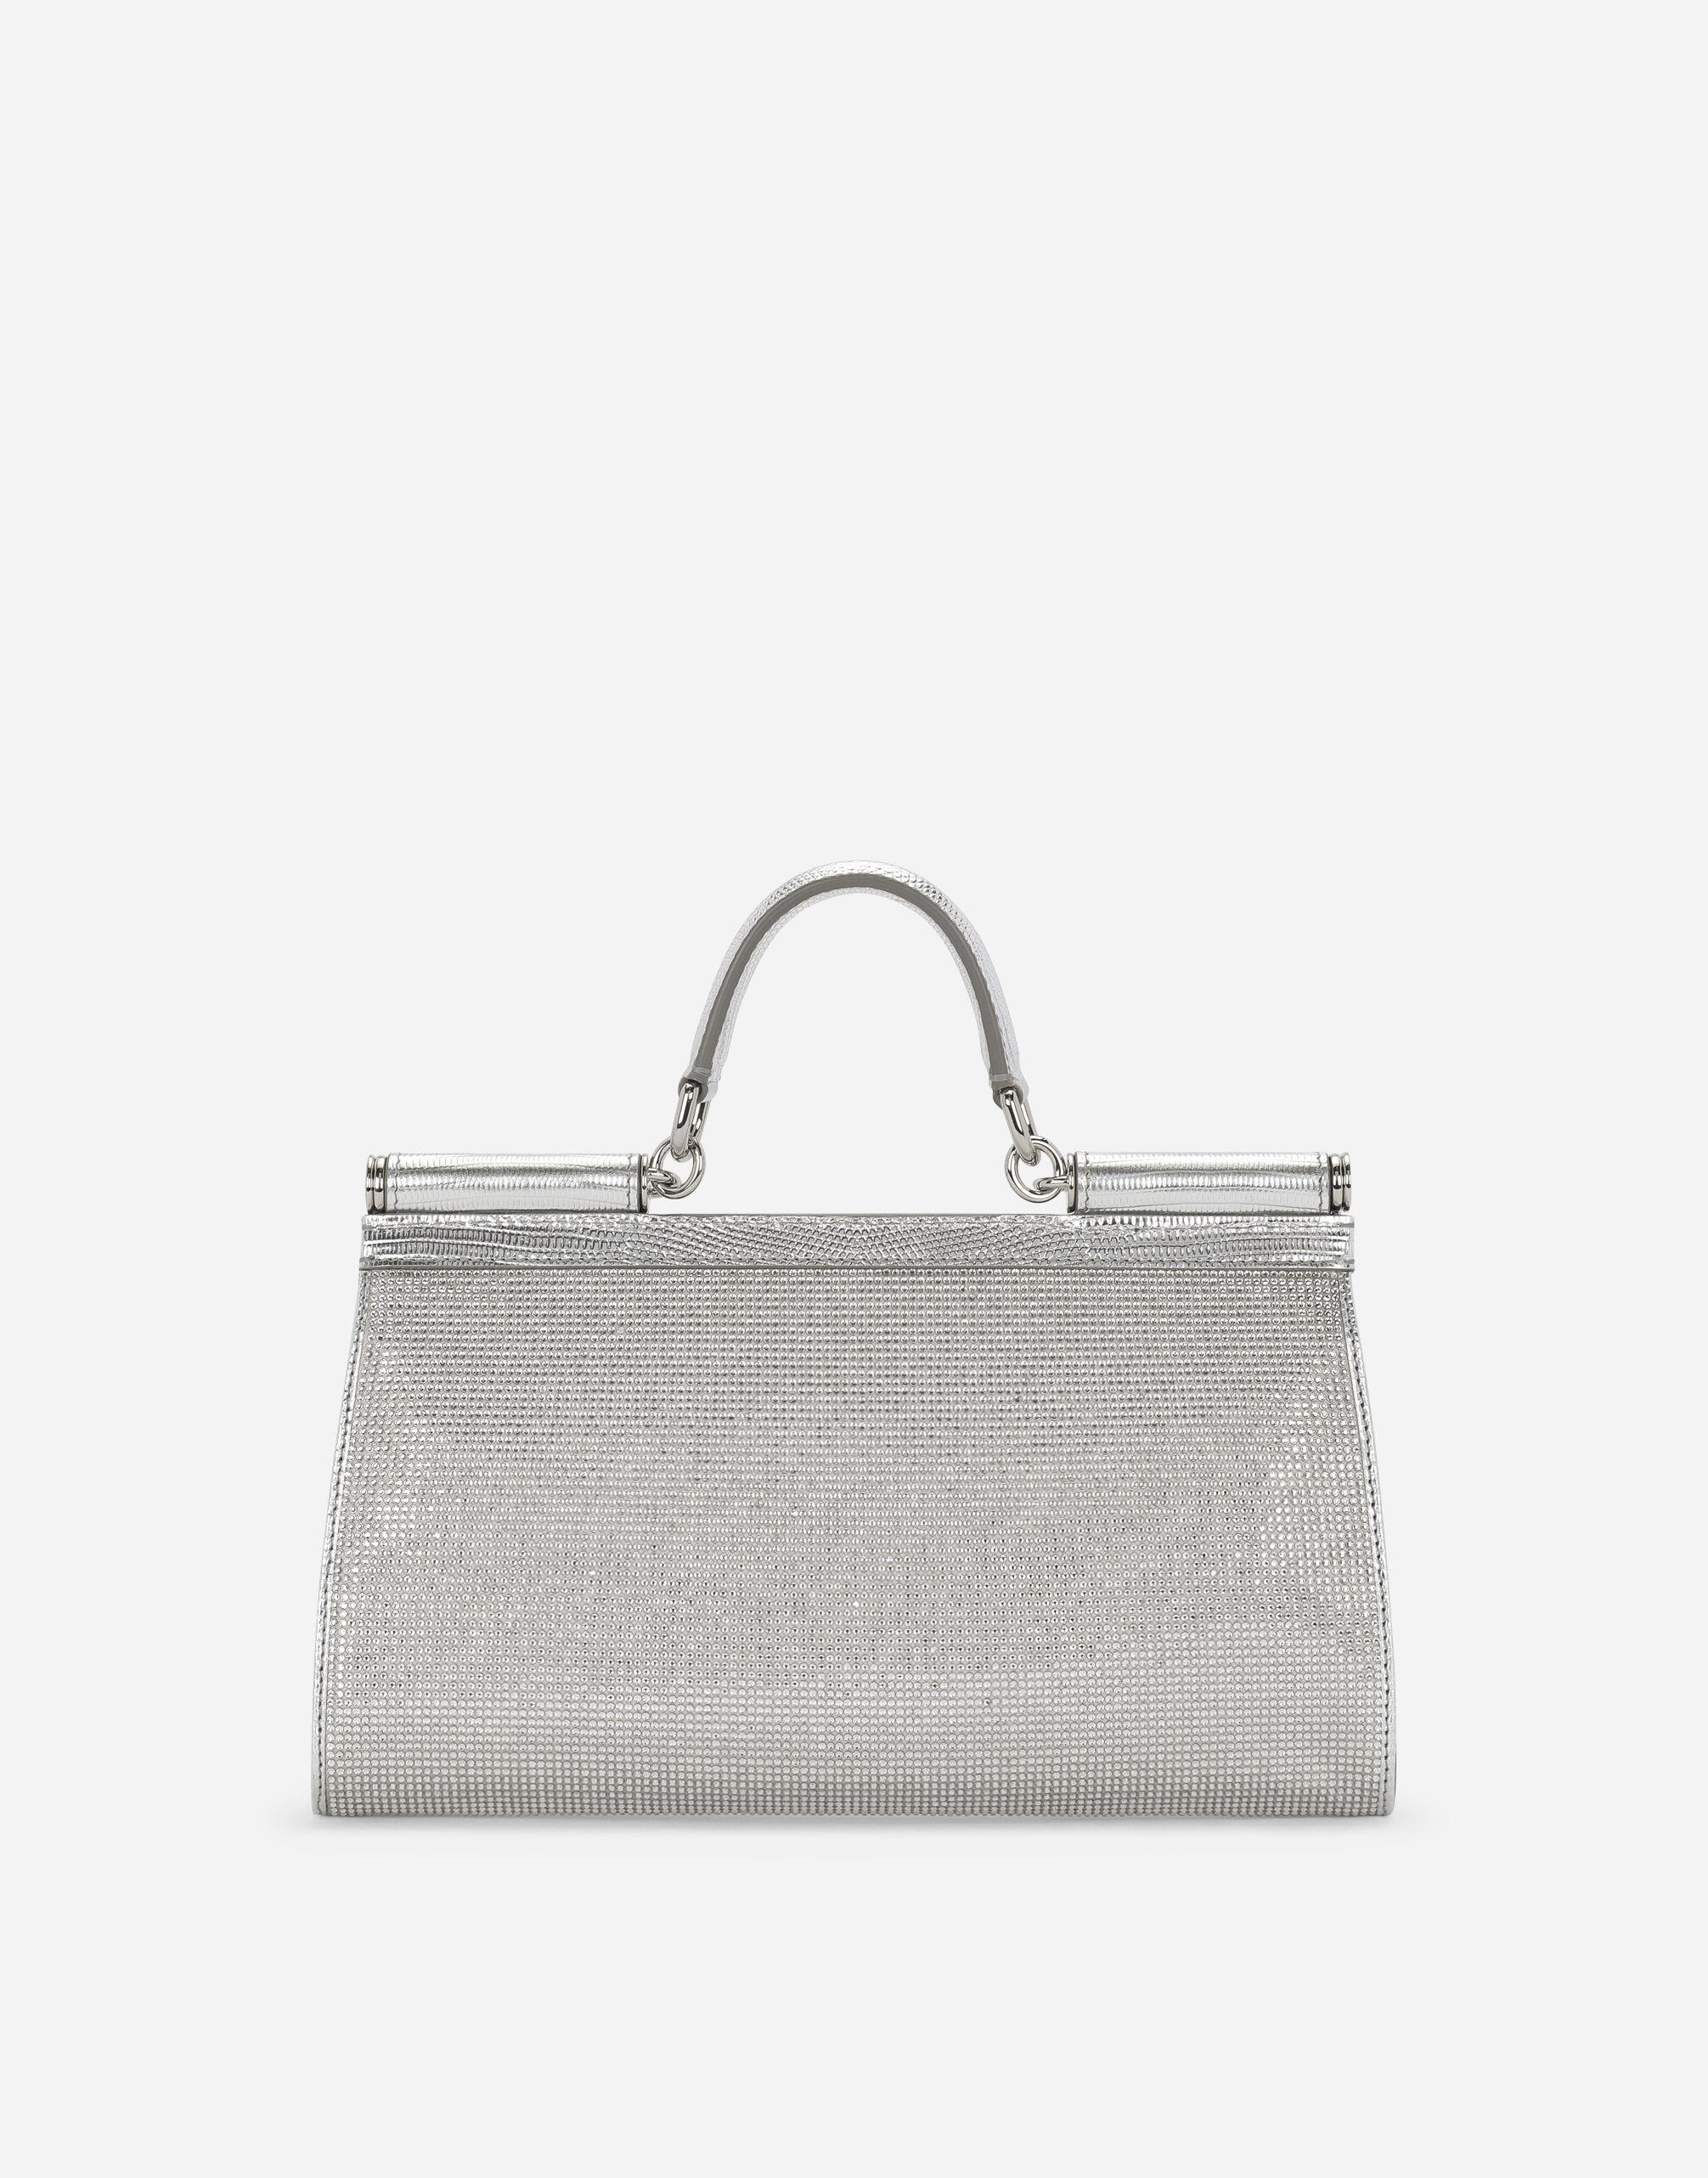 Dolce & Gabbana Satin Sicily Bag With Fusible Rhinestones in Gray | Lyst